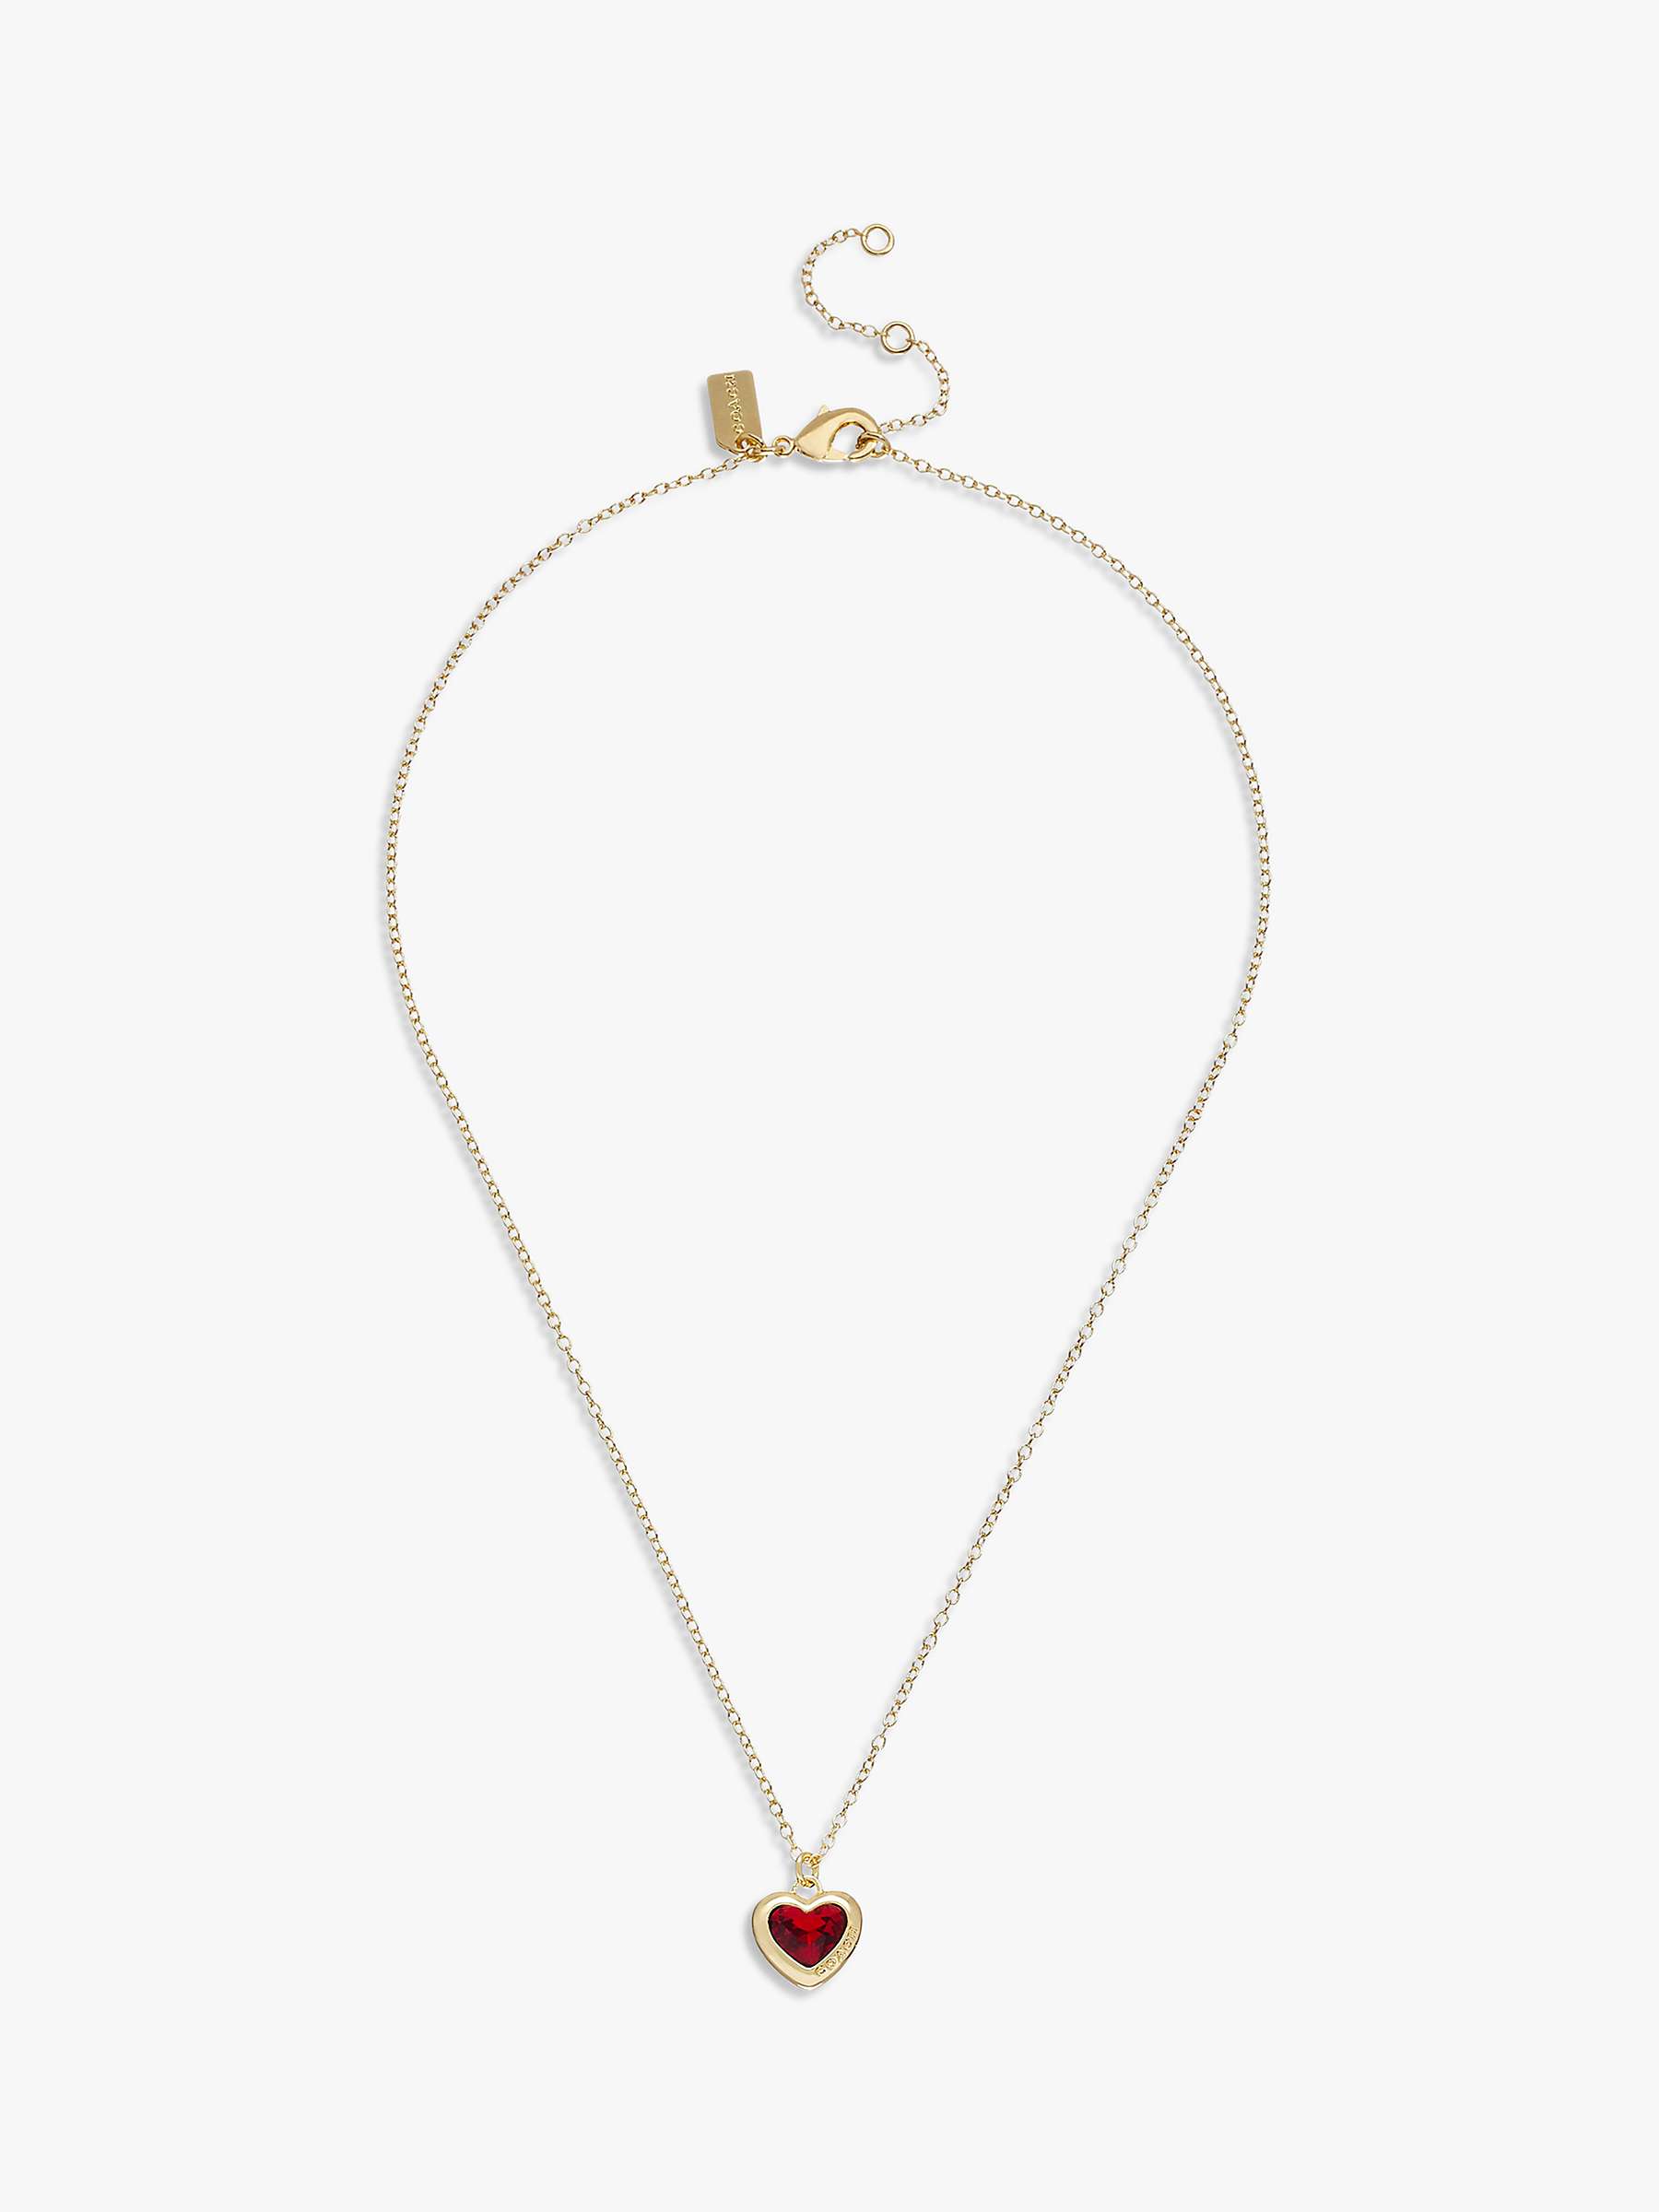 Buy Coach Crystal Heart Pendant Necklace, Gold/Red Online at johnlewis.com